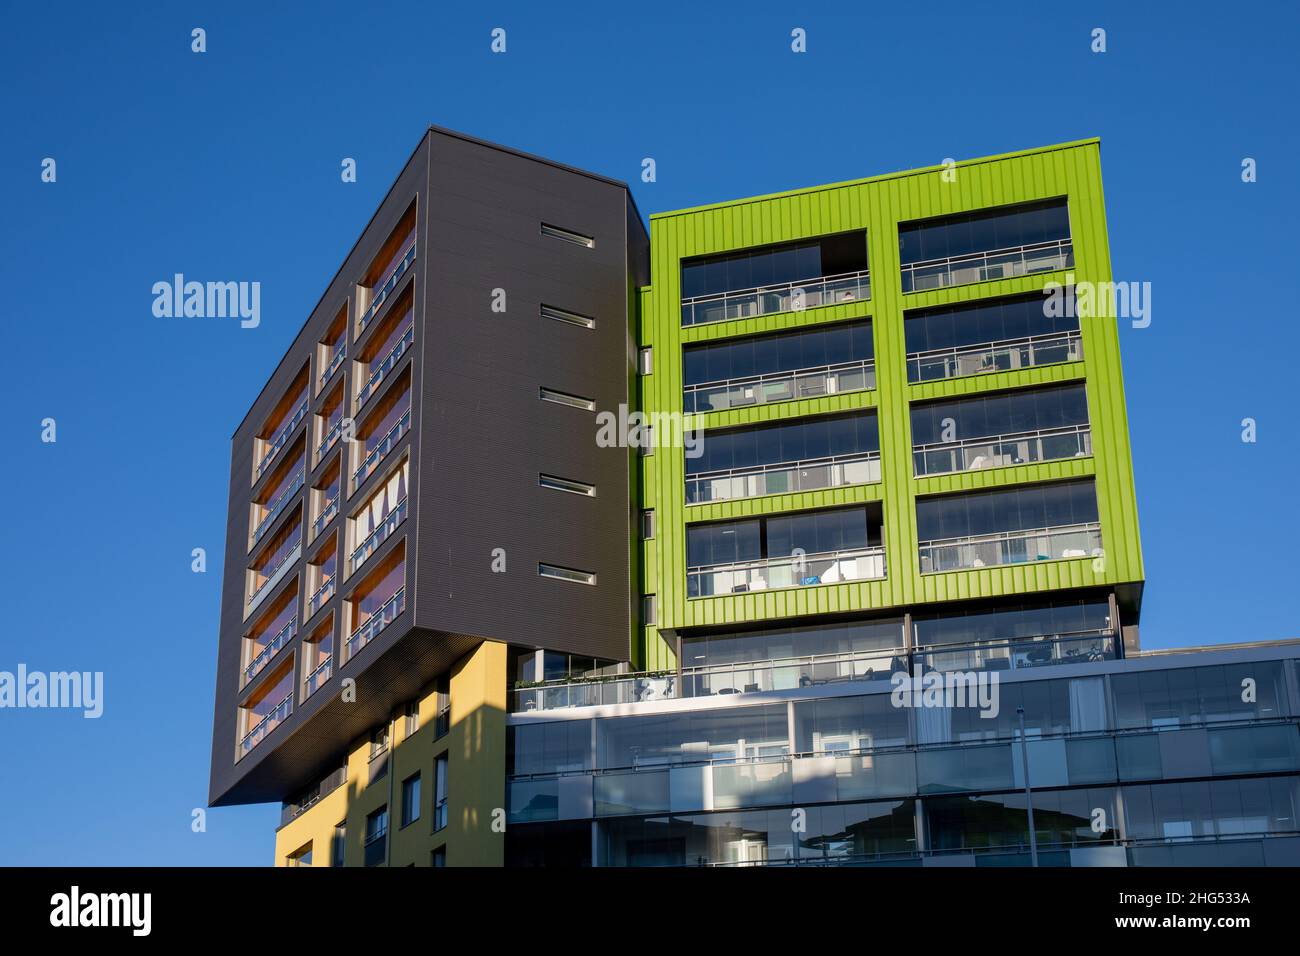 Konepaja district contemporary architecture against clear blue sky in Helsinki, Finland Stock Photo